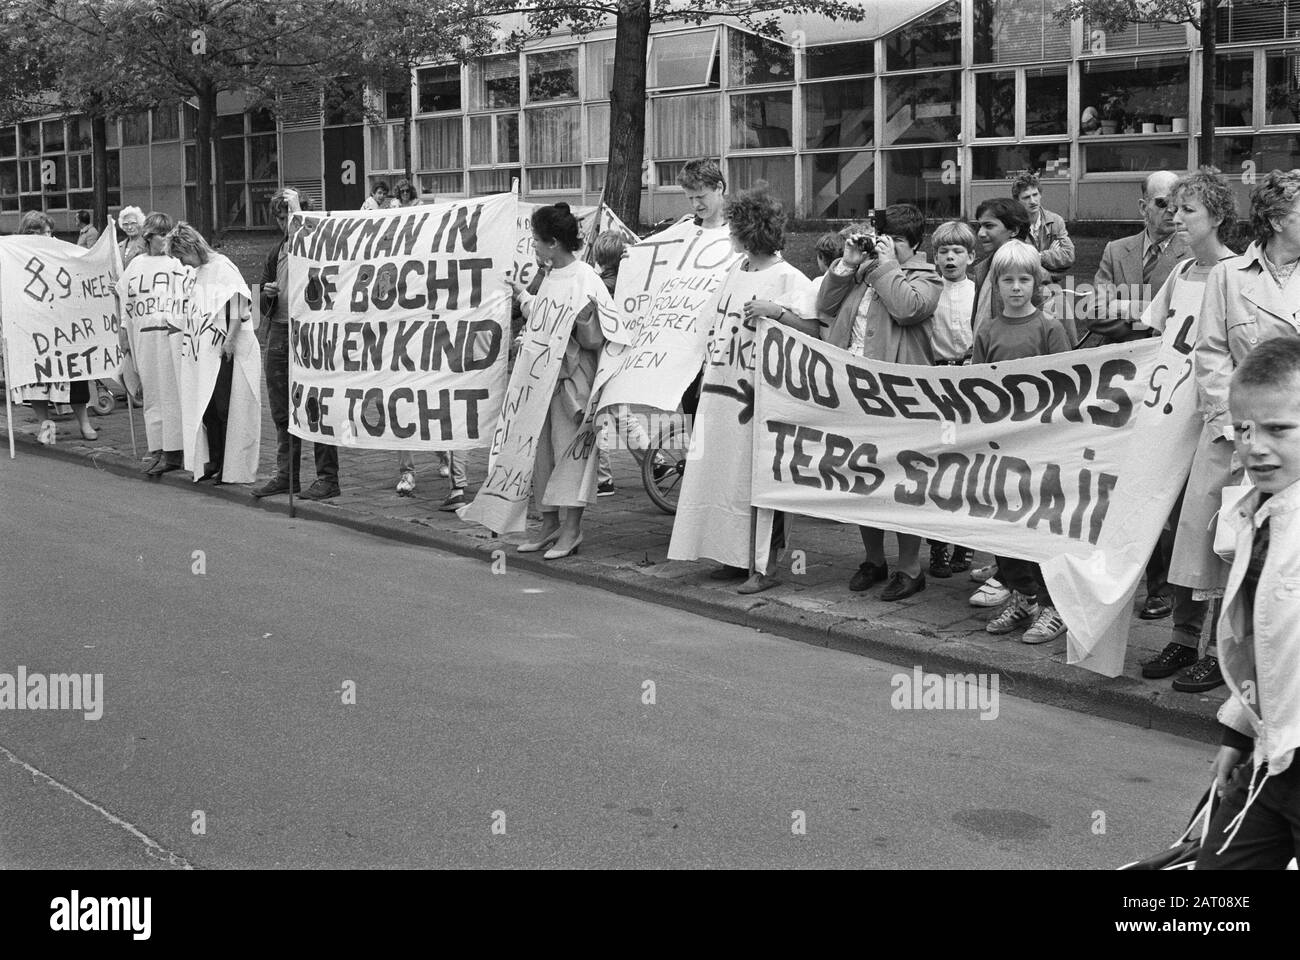 Women of Fiom shelters for unmarried mothers demonstrate at the opening of a home for unhoused people of the HVO (Help voor Unhouden) in Amsterdam with a banner Brinkman in the bend, woman and child on the tour Date: 31 May 1983 Location: Amsterdam, Noord-Holland Keywords: demonstrations, cuts, banners, women Stock Photo